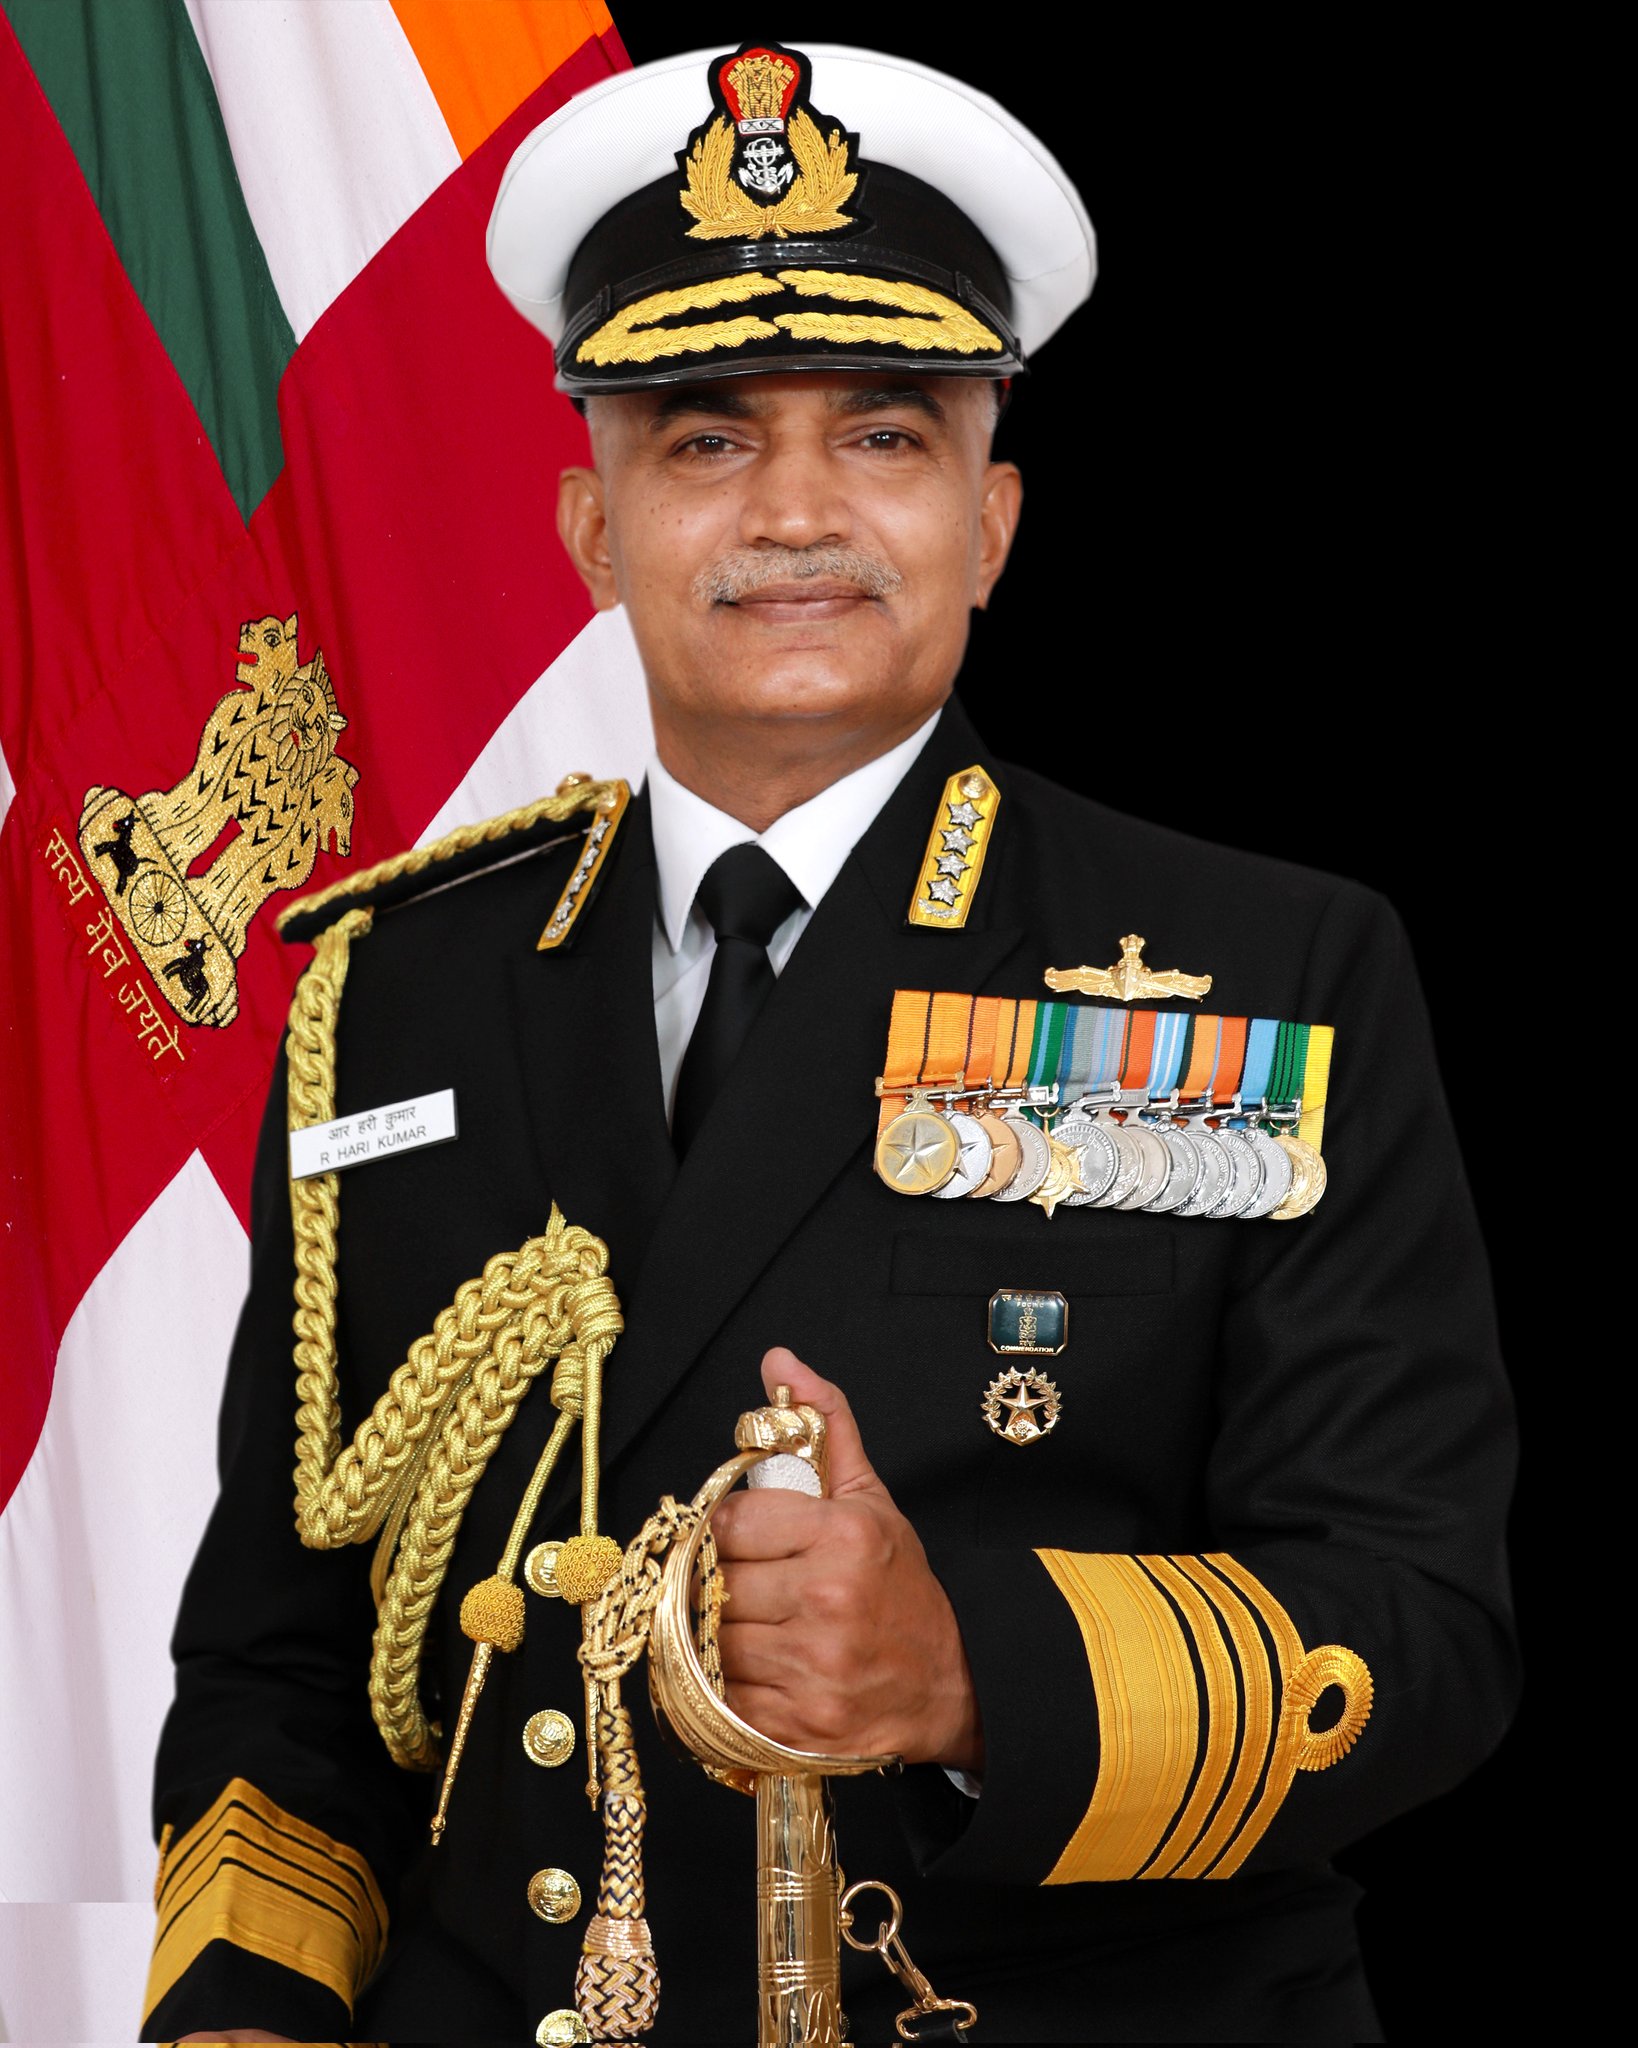 Why does the Indian naval force wear a white uniform? - Quora